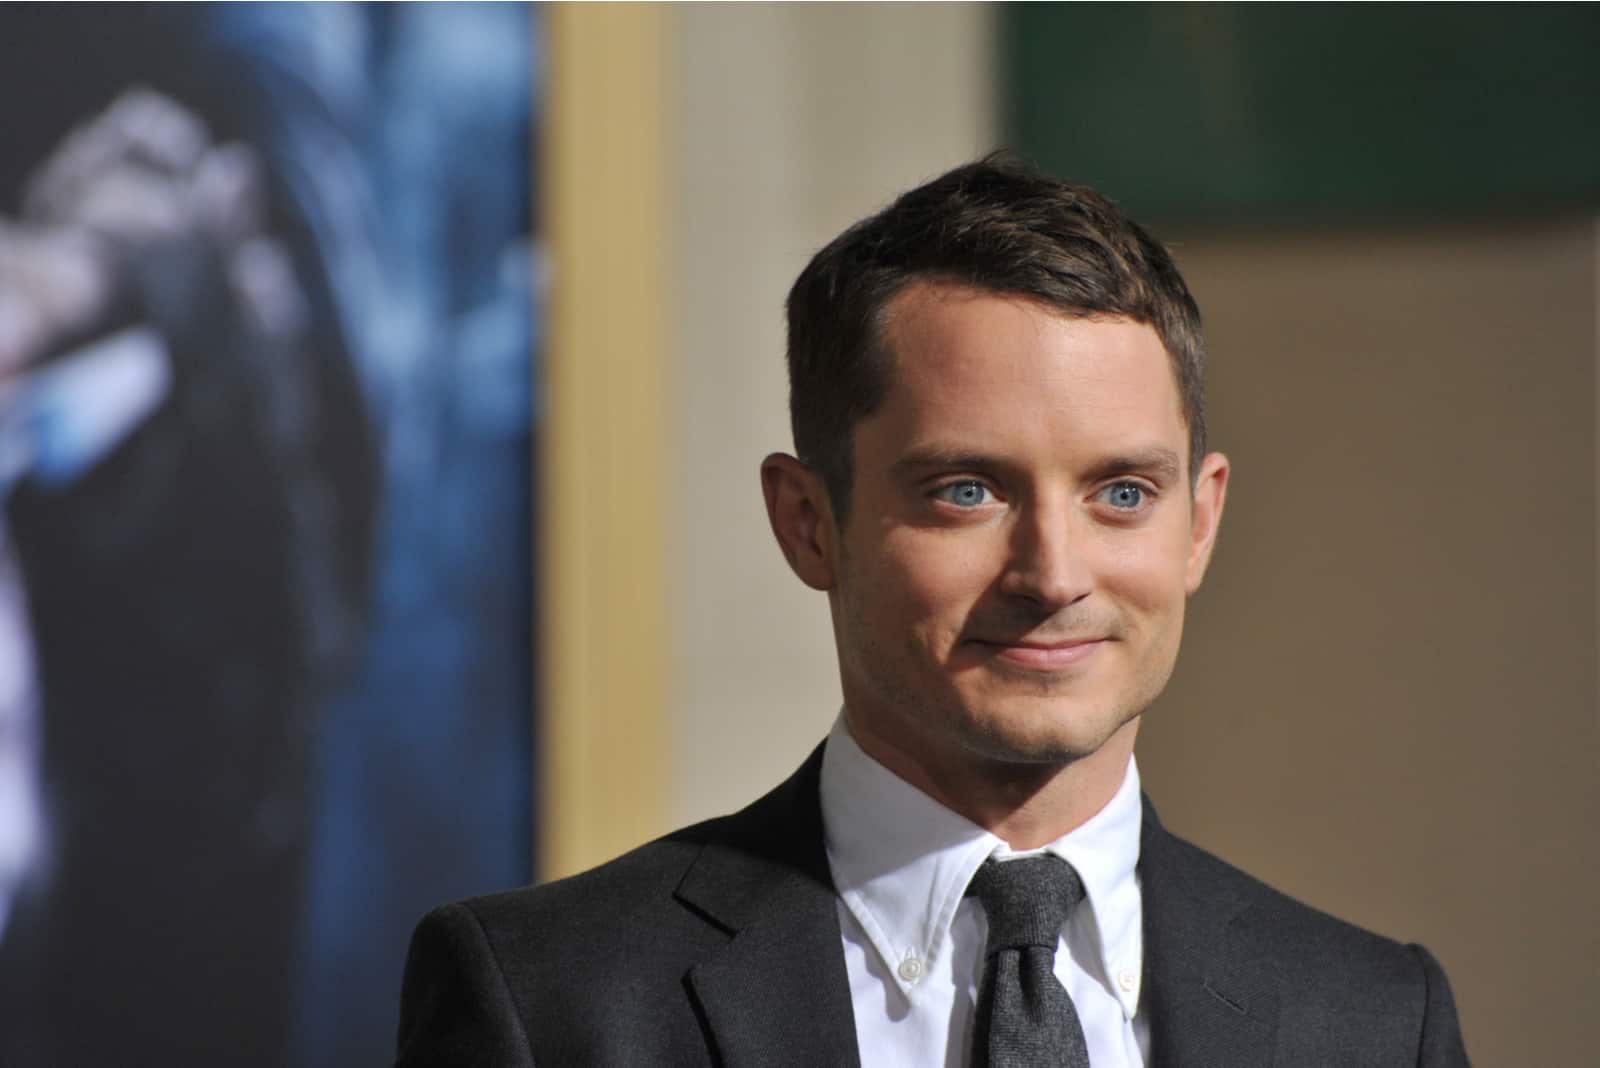 the beautiful Elijah Wood stands in the ward